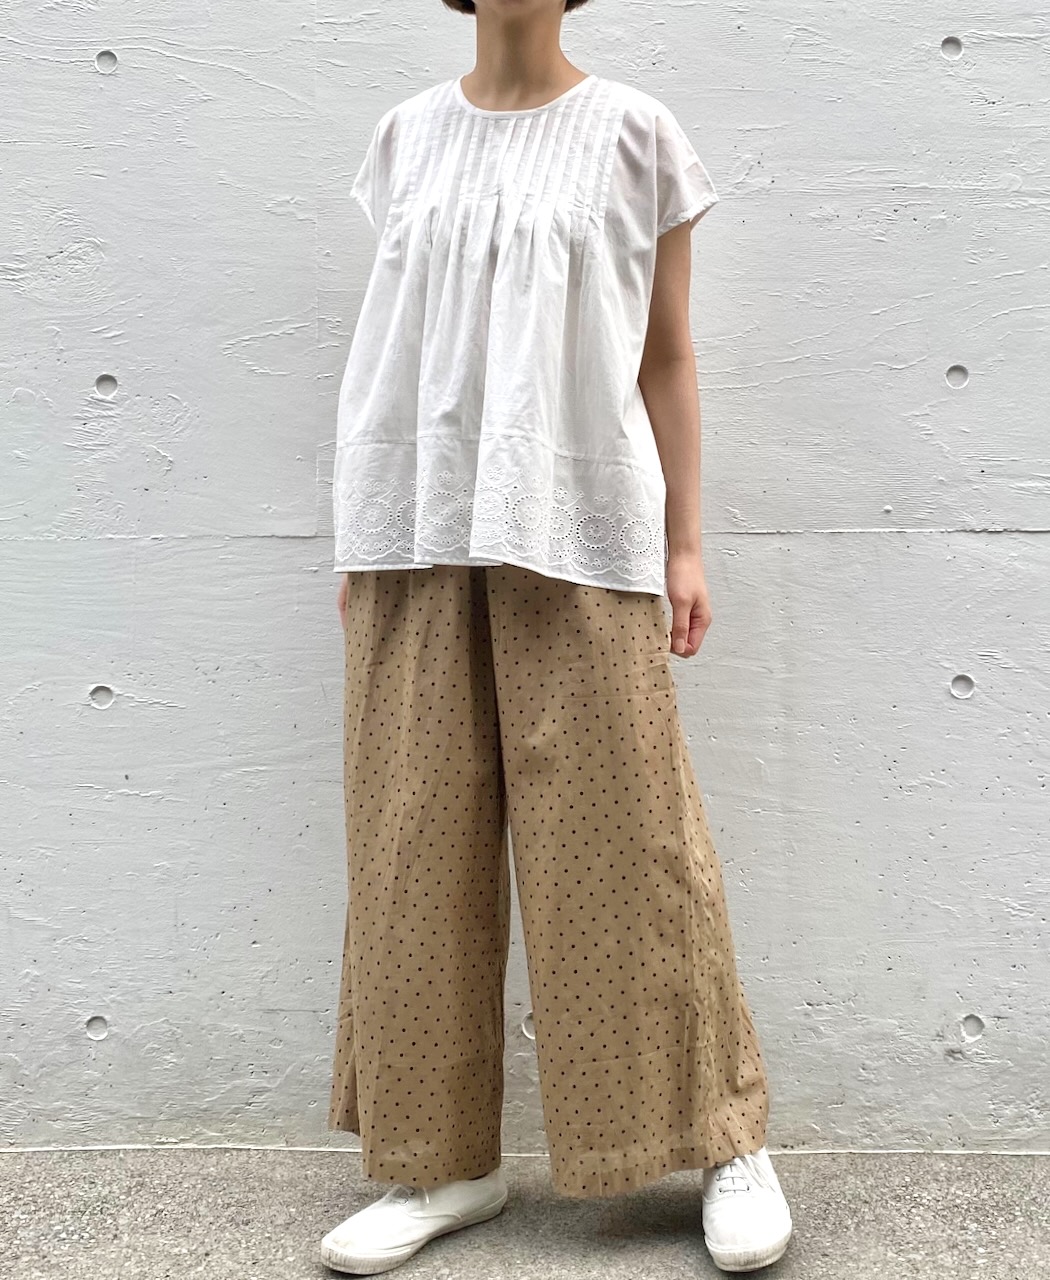 INSL24223 (ブラウス) 80'S VOILE PLAIN WITH CUT WORK LACE CREW-NECK FRENCH/SL SHIRT WITH PINTUCK